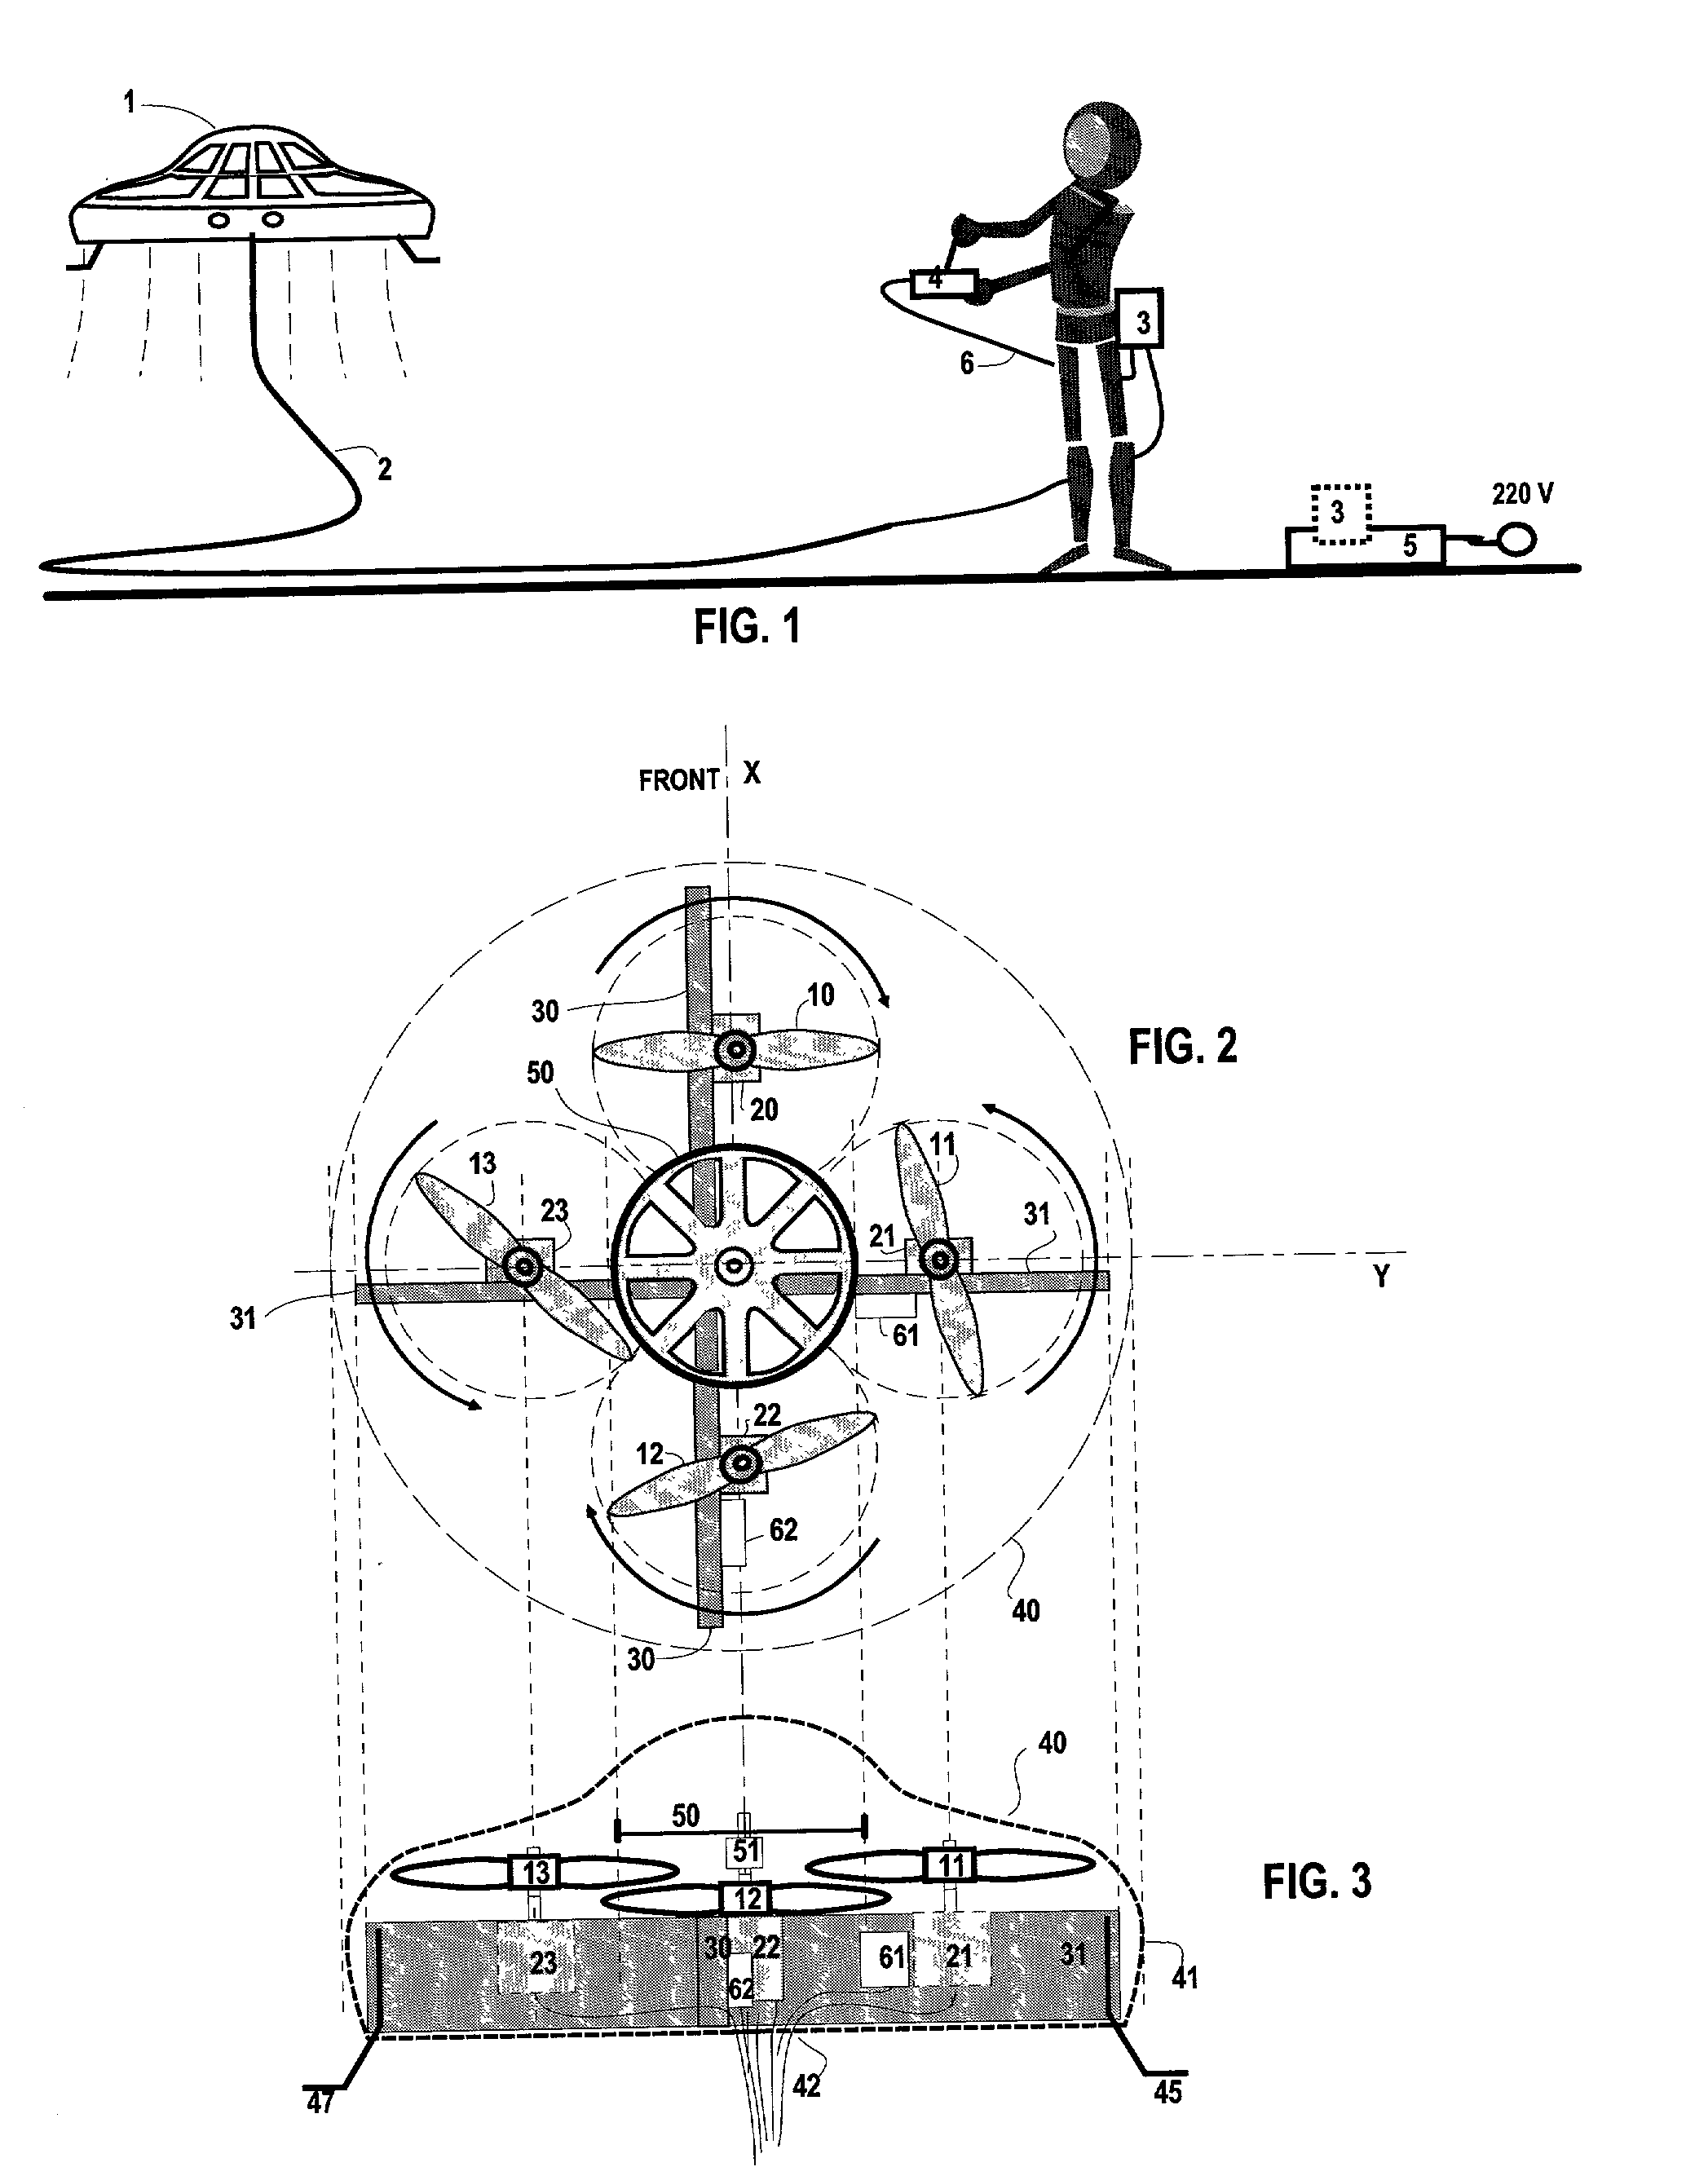 Electrical remote-control and remote-power flying saucer